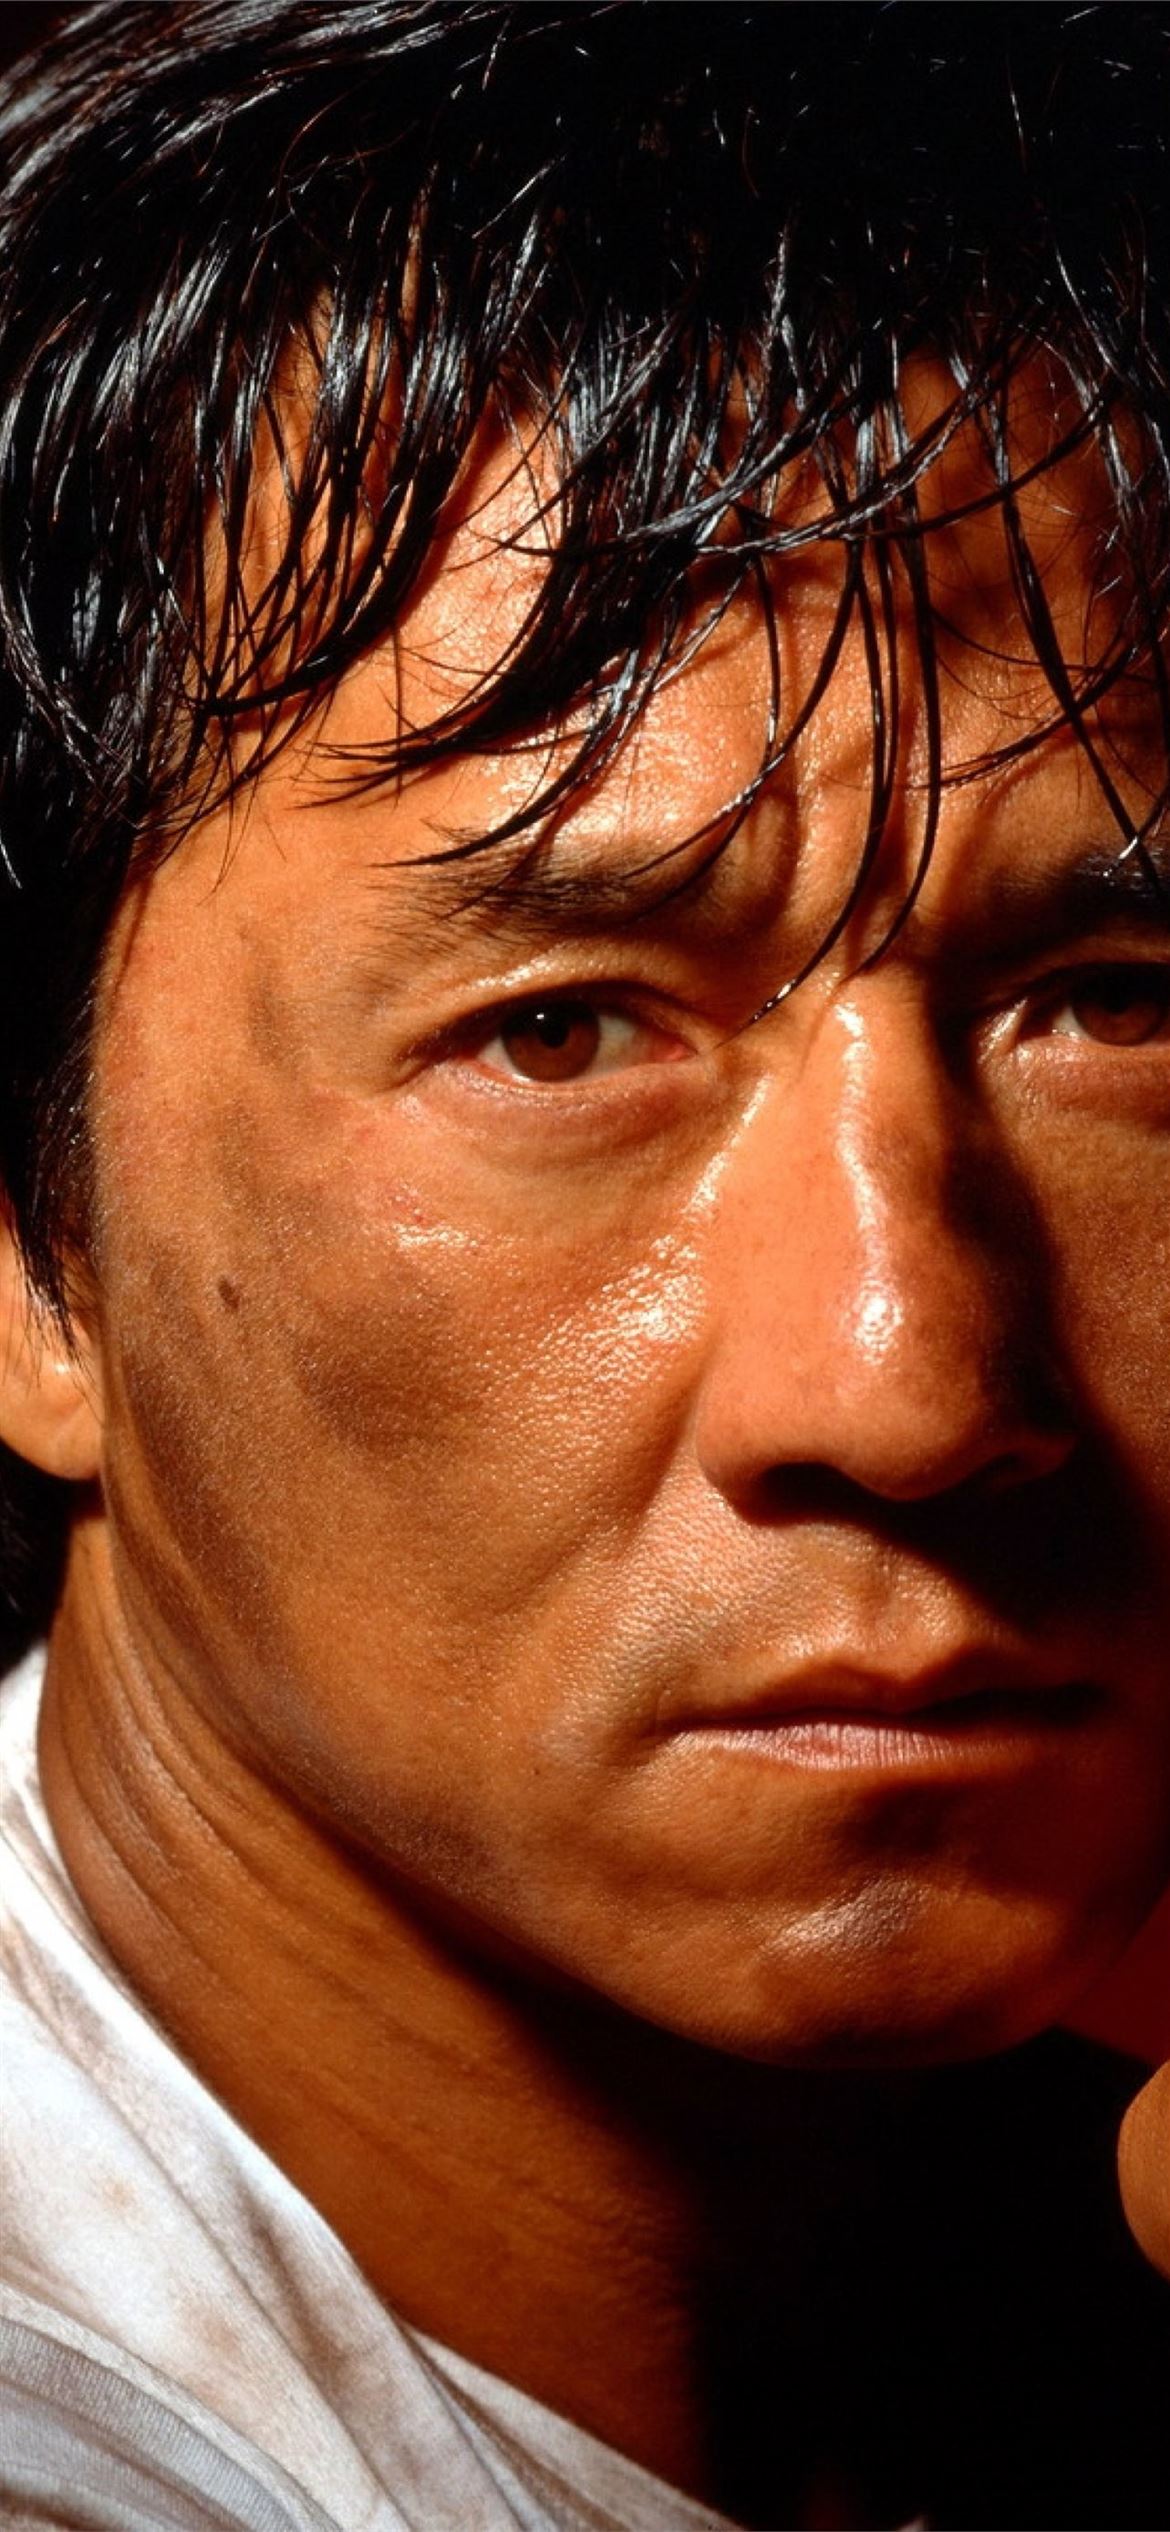 Jackie Chan Images Resolution HD Celebrities 4K Im iPhone 1170x2532